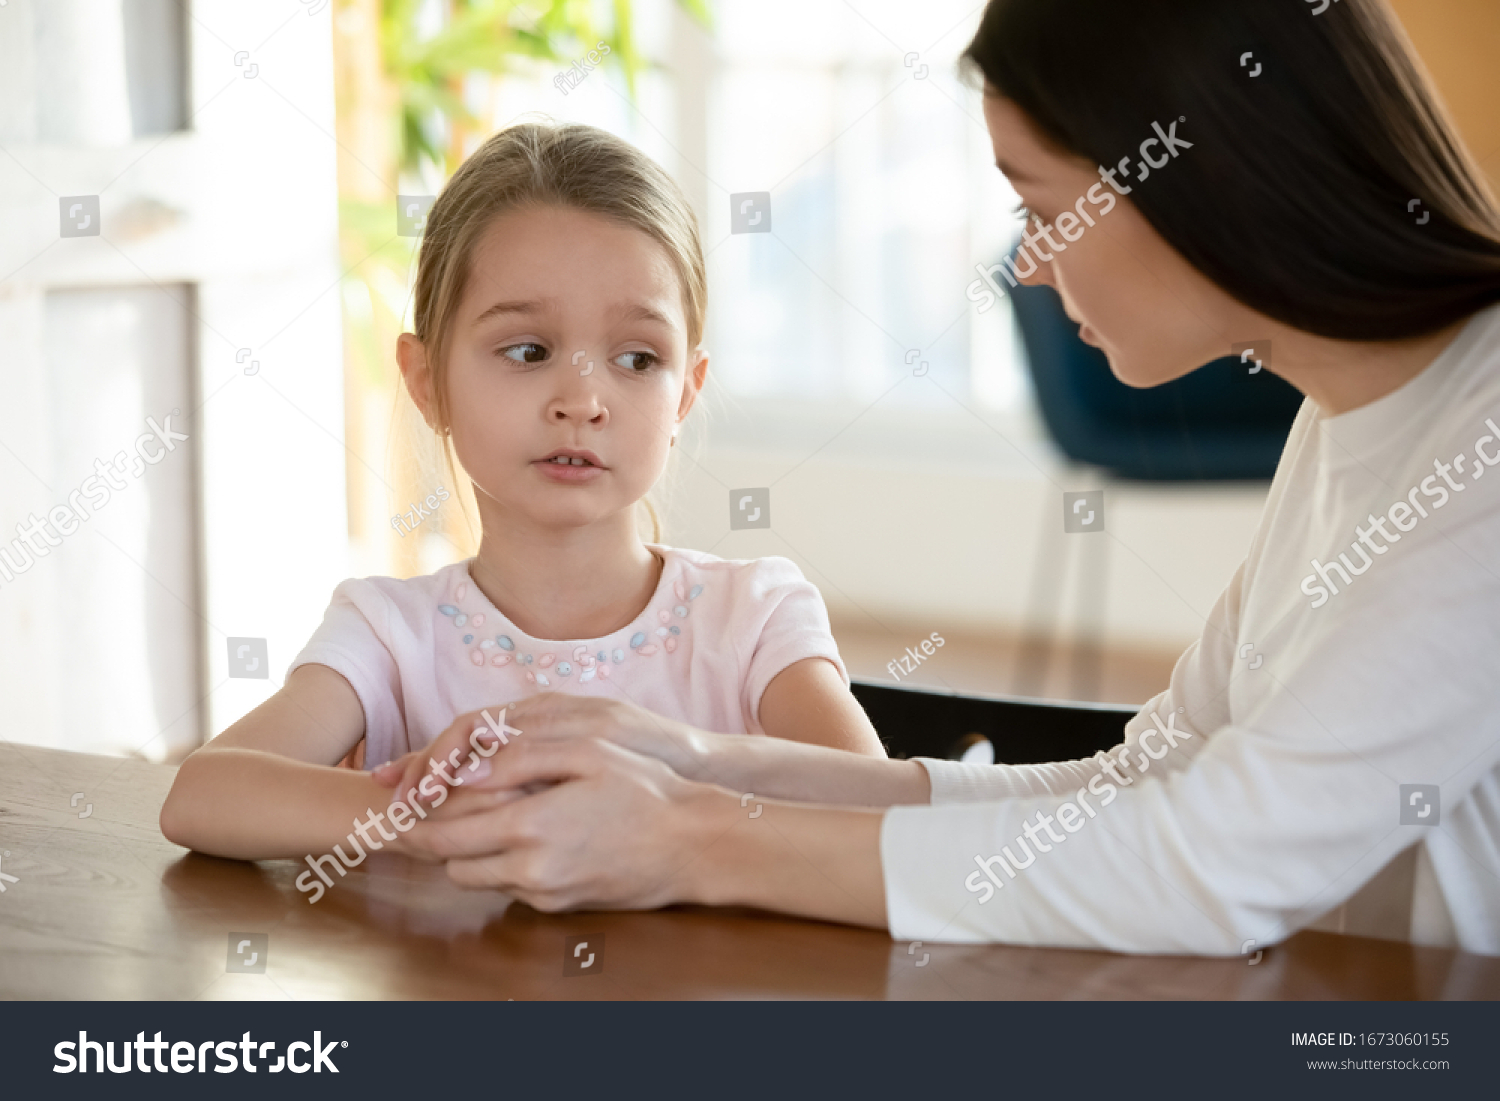 Head shot unhappy small child girl sitting at table with worrying mother, sharing school problems. Compassionate caring attentive mommy having trustful conversation with unhappy offended daughter. #1673060155